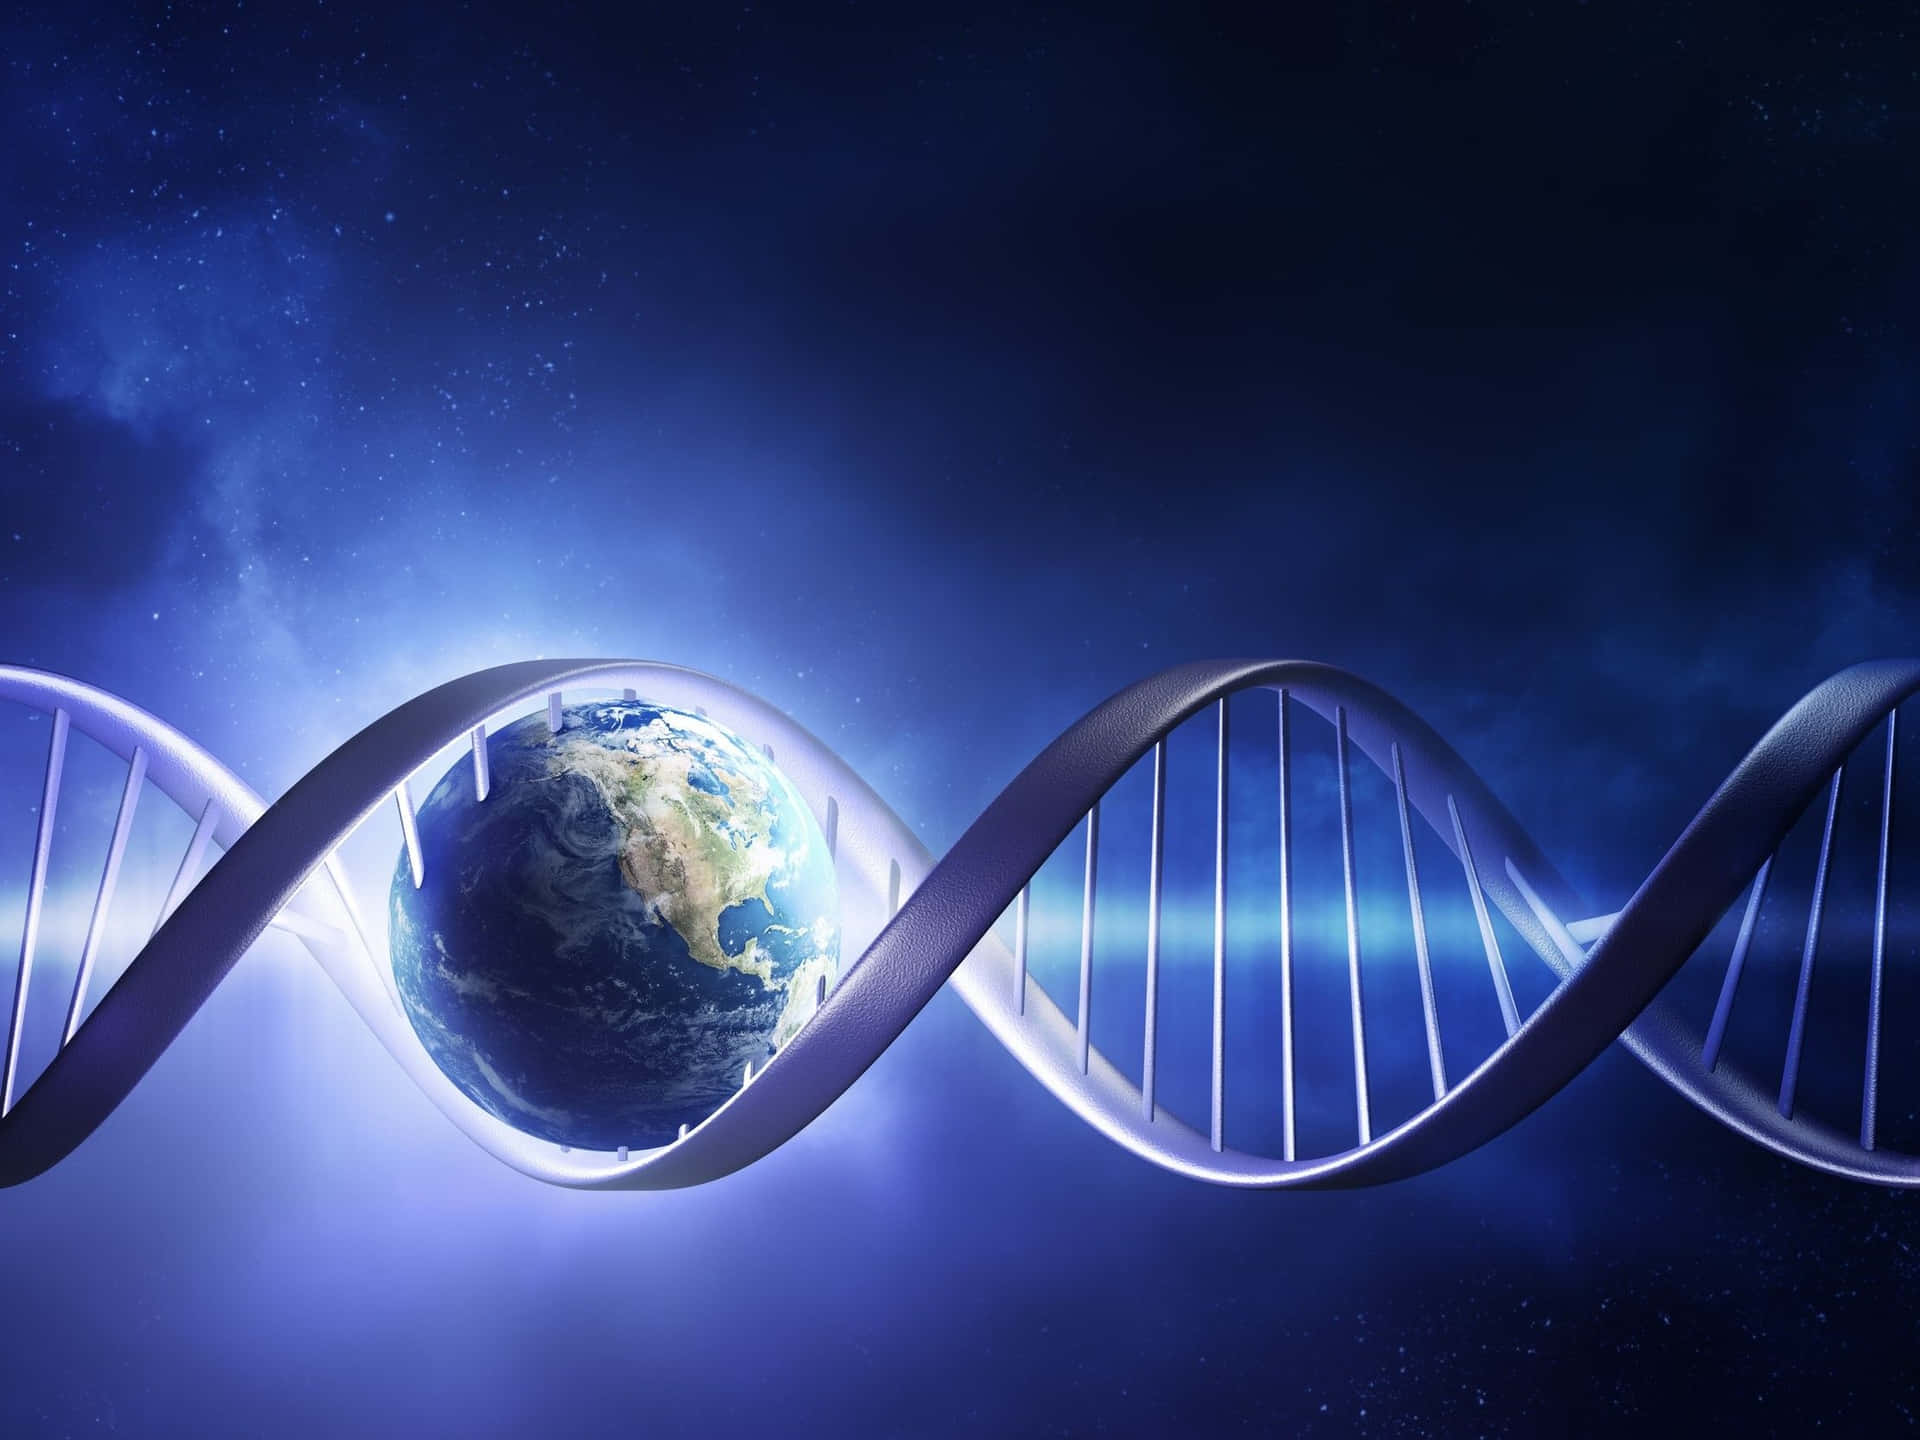 Unlocking the mysteries of life through DNA